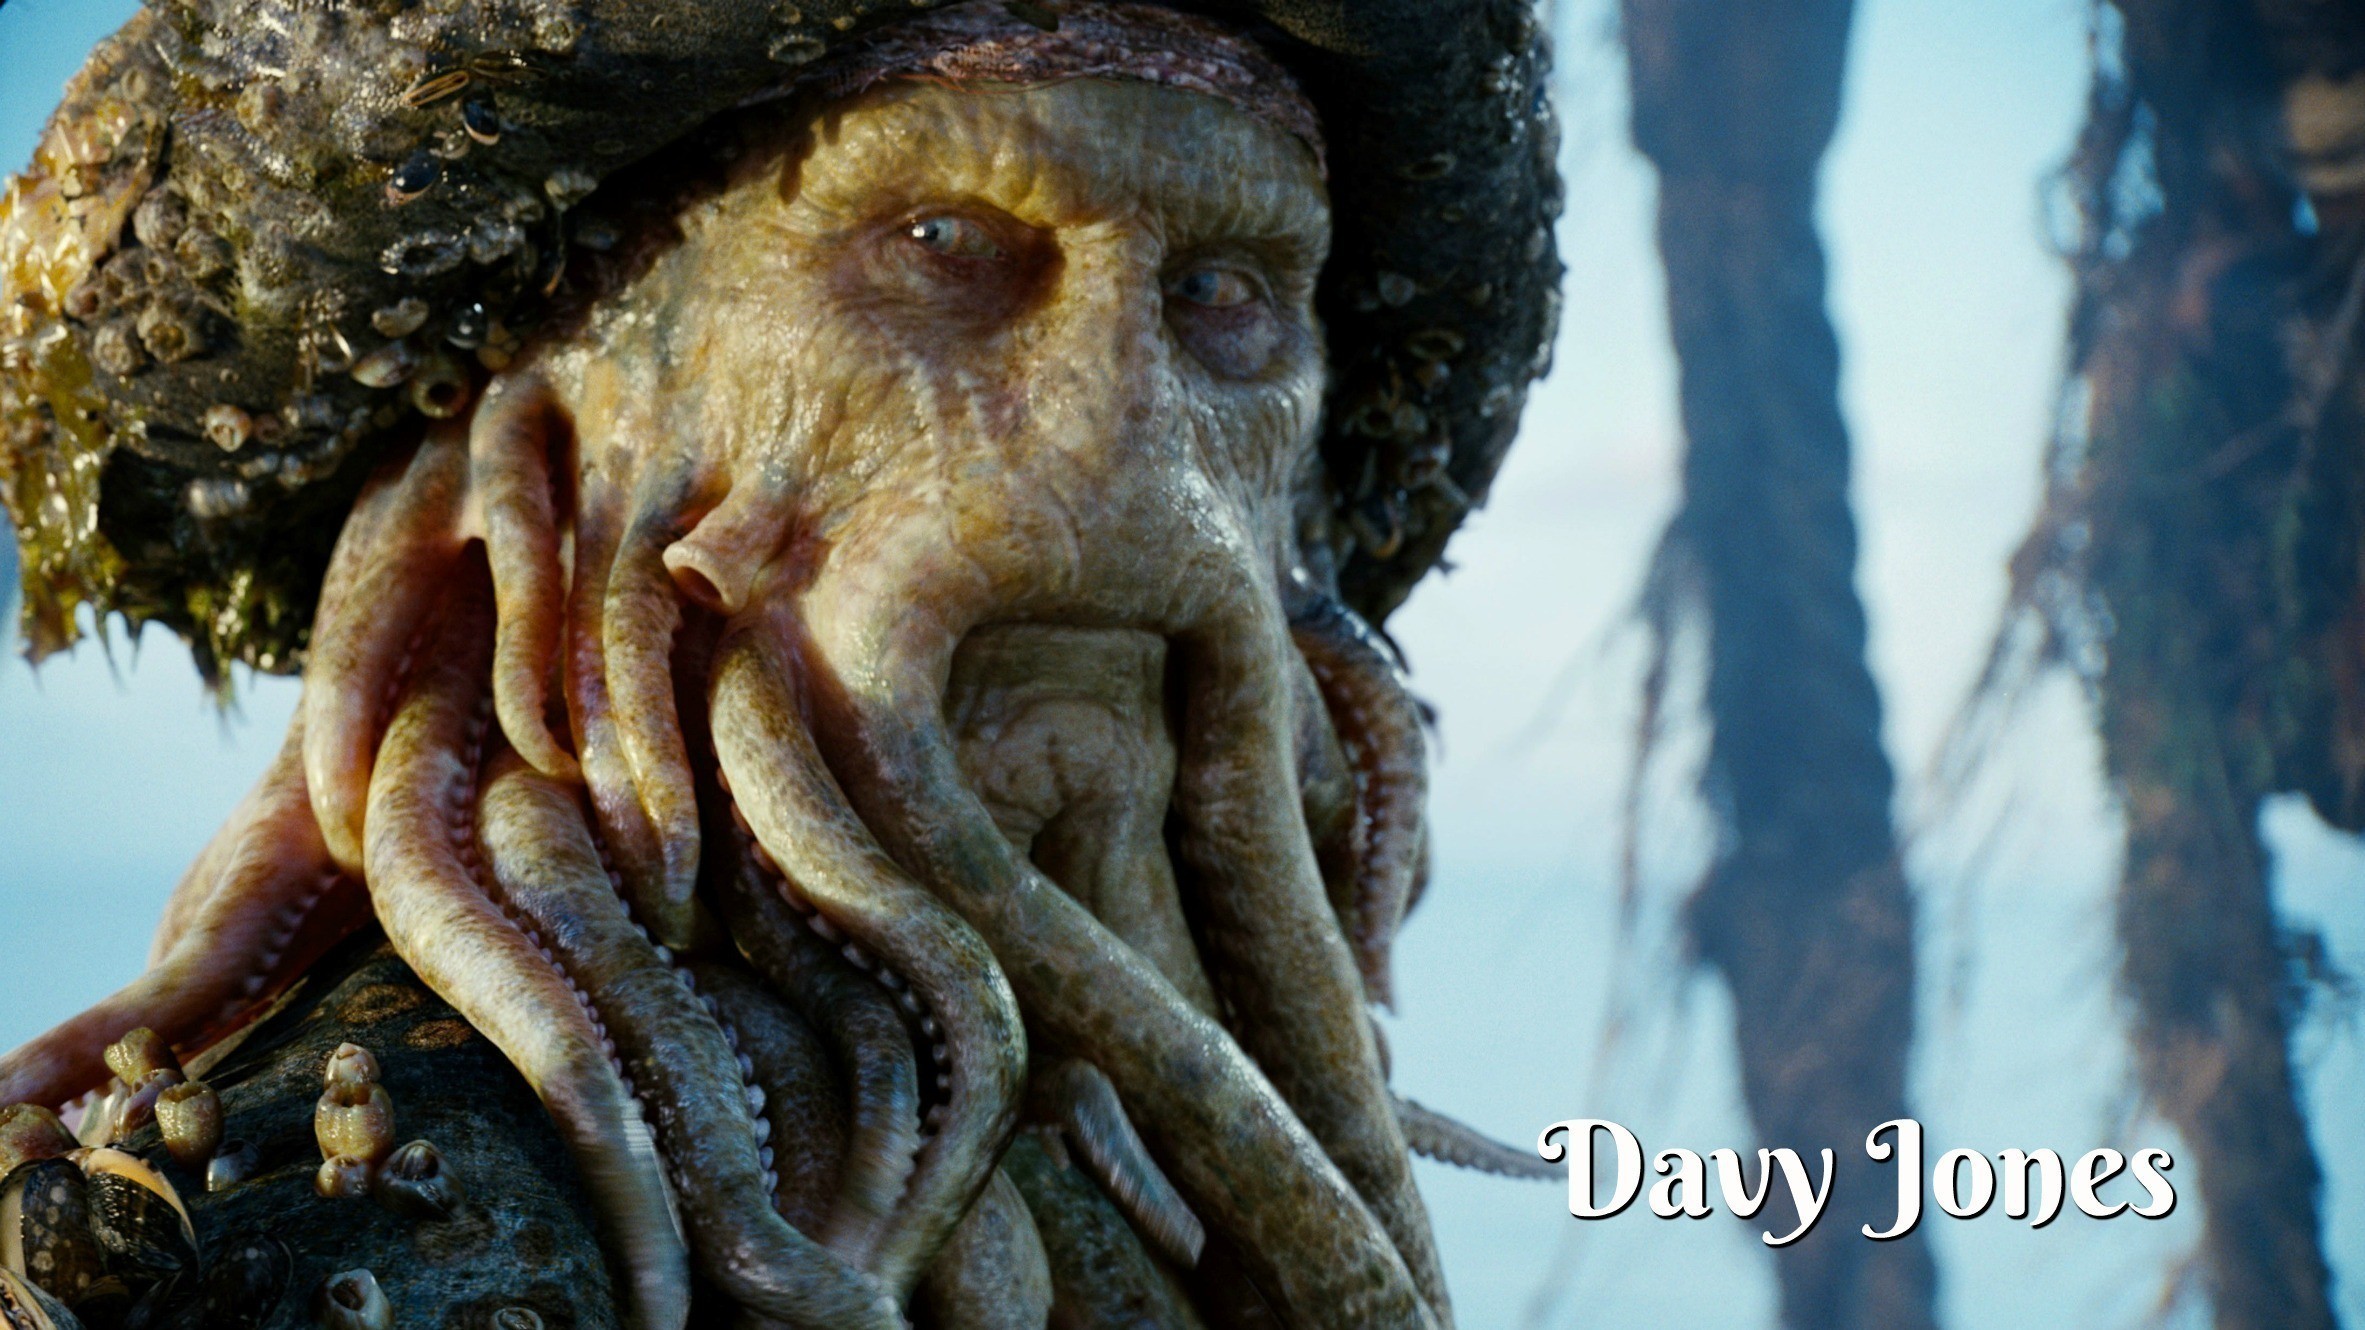 2365x1330 Davy Jones is easily one of the most distinctive villains in Hollywood, not  to mention the Pirates franchise. As fearsome as he looks, there's a real  ...